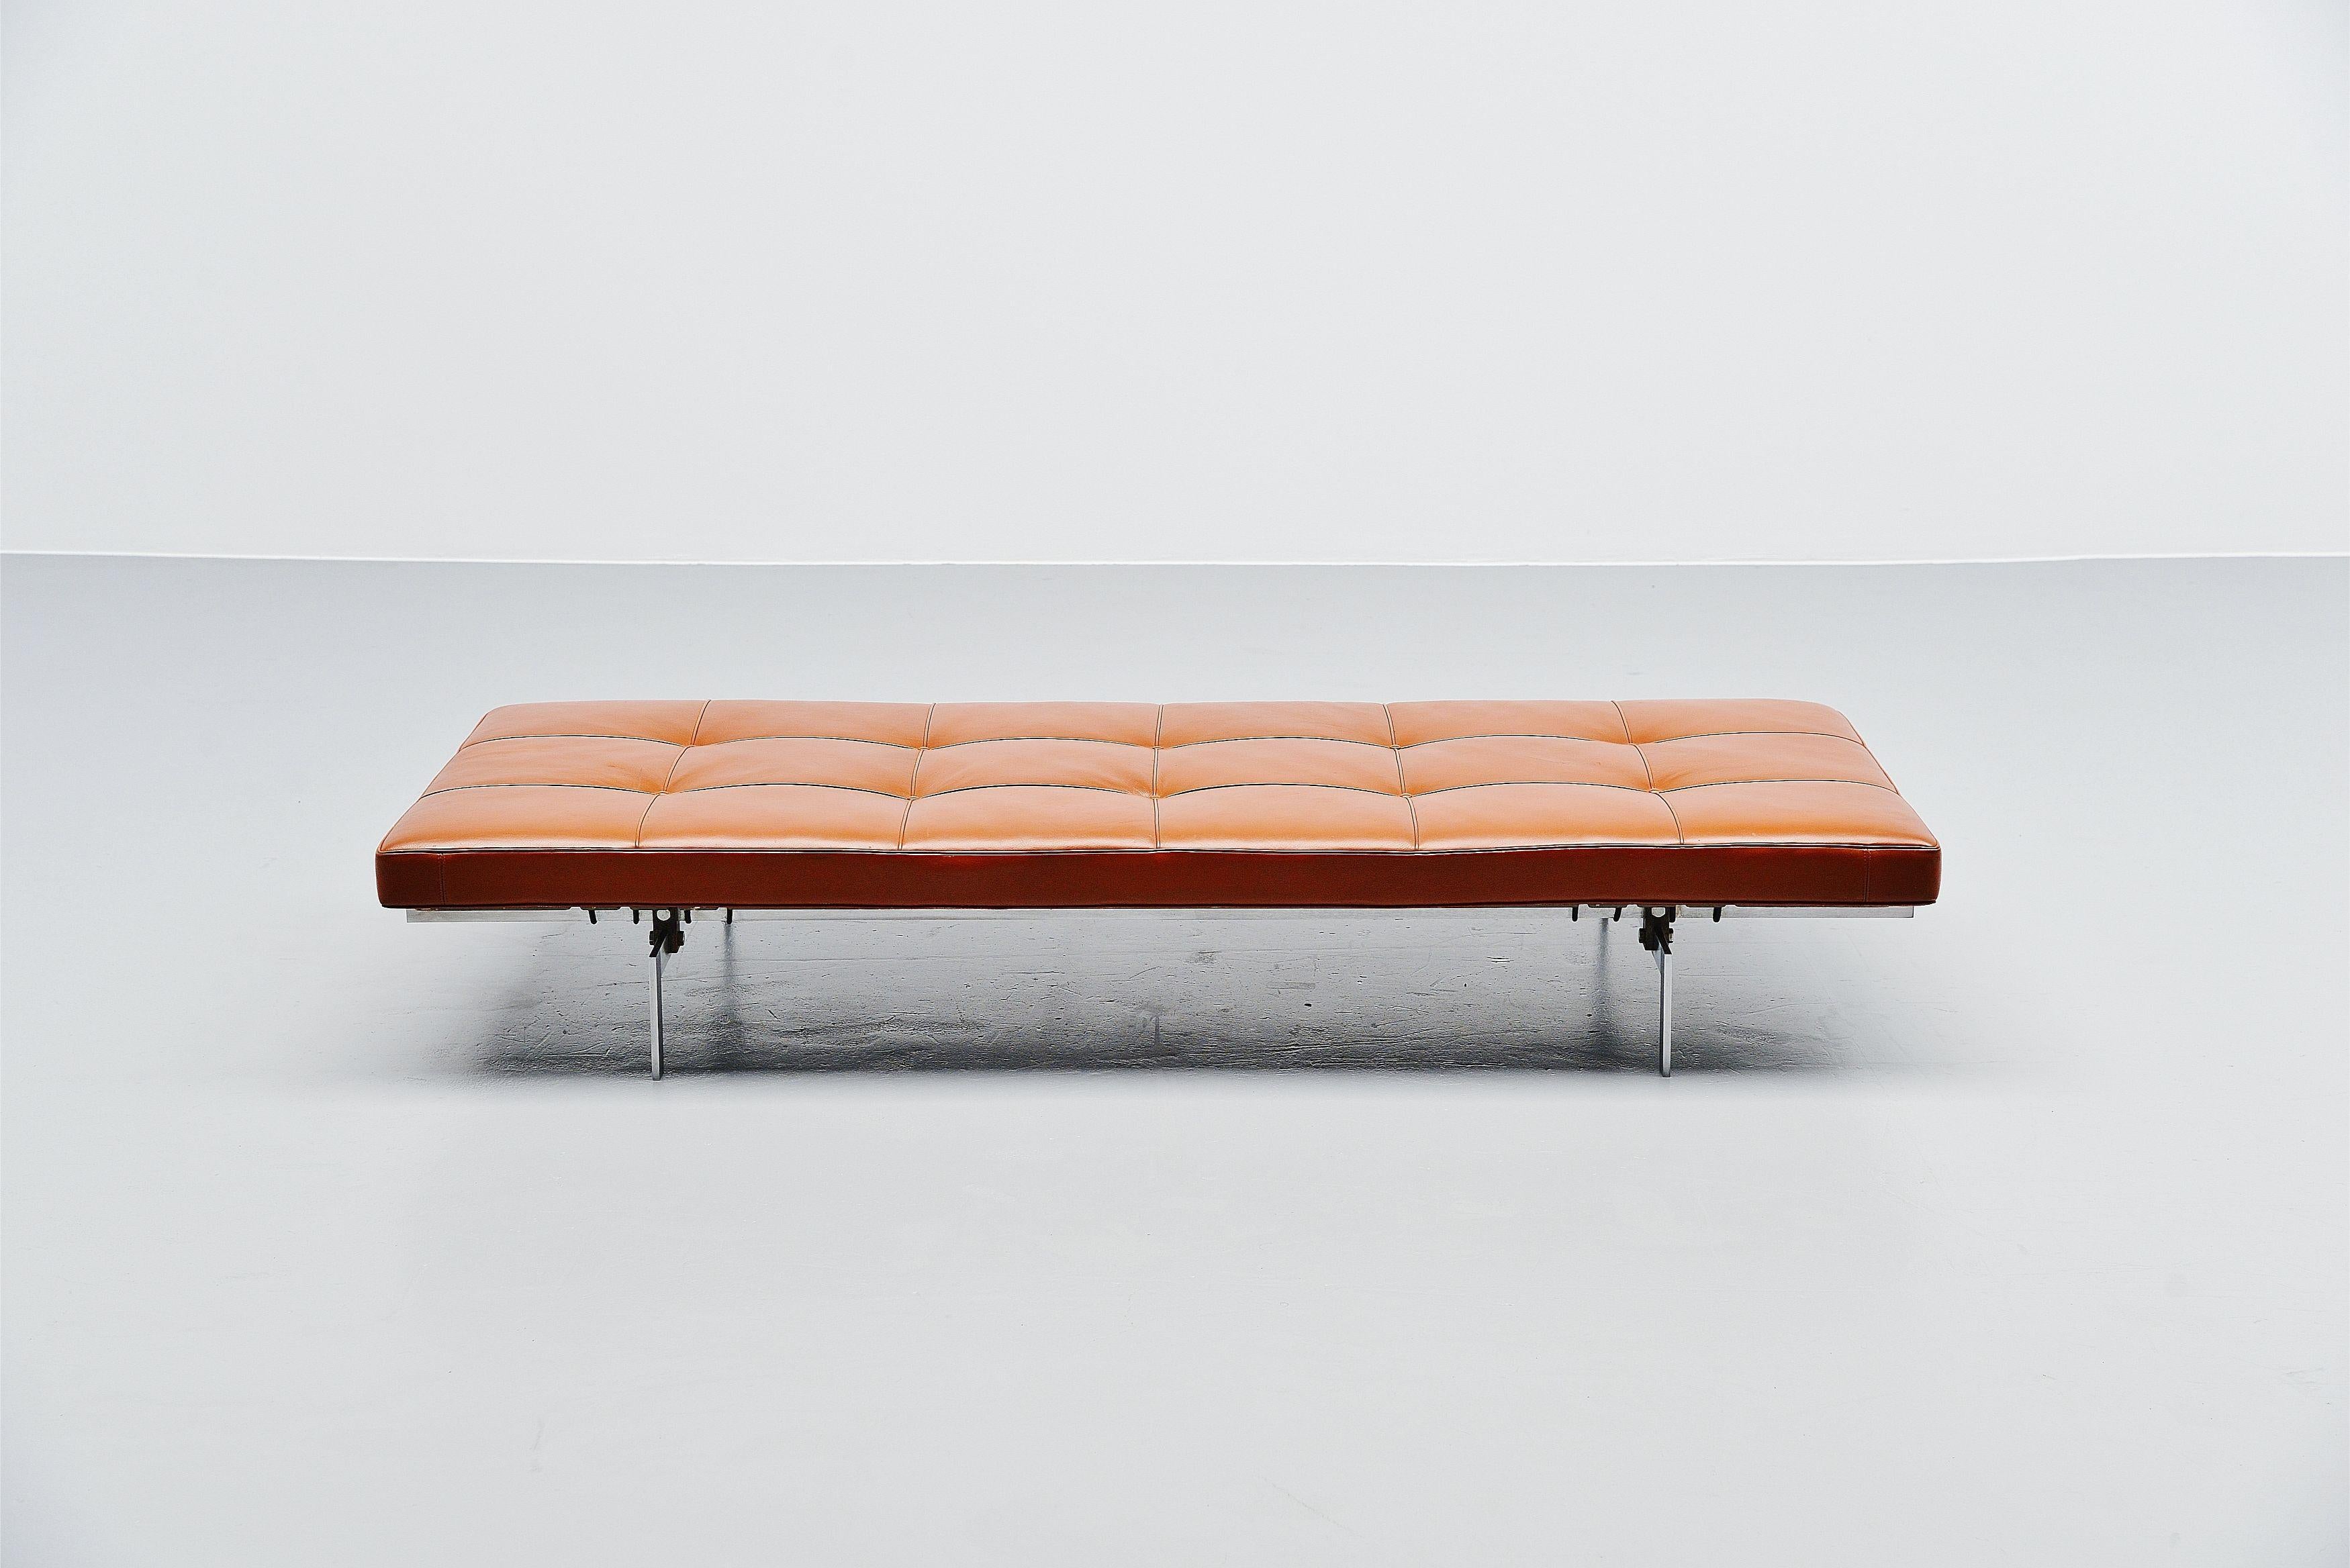 Iconinc daybed model PK80 designed by Poul Kjaerholm and manufactured by Ejvind Kold Christensen, Denmark, 1957. The daybed is in fantastic fully original condition, as this was from an old store stock it was only used a showroom model. This is a